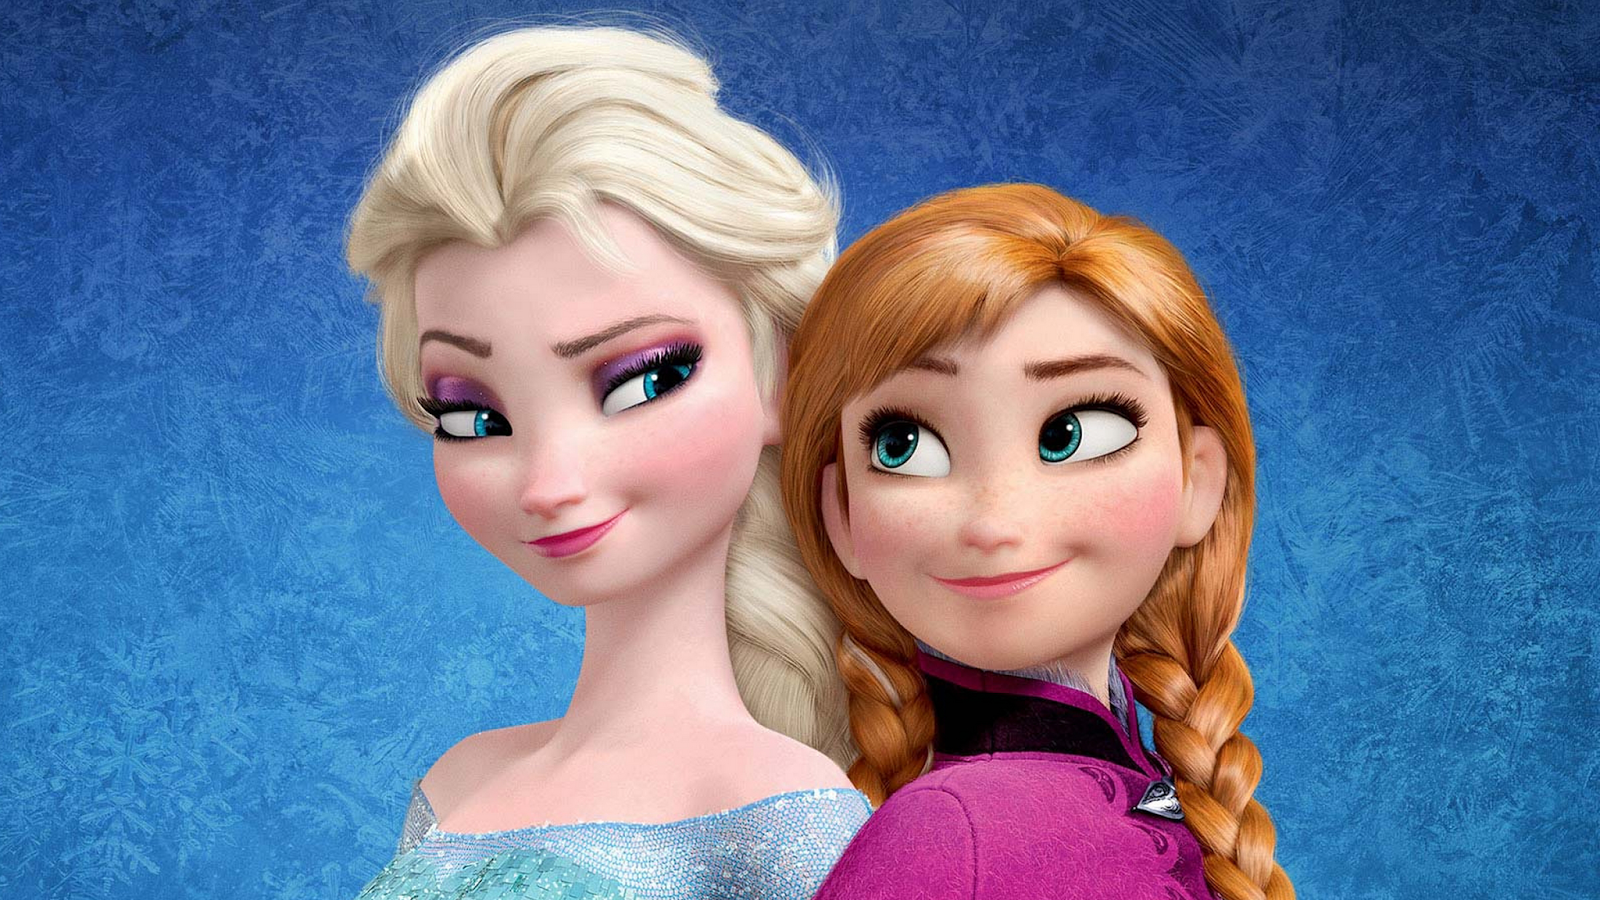 Top 10 Highest-Grossing Films Directed by Women (Other Than Barbie) Frozen (2013)